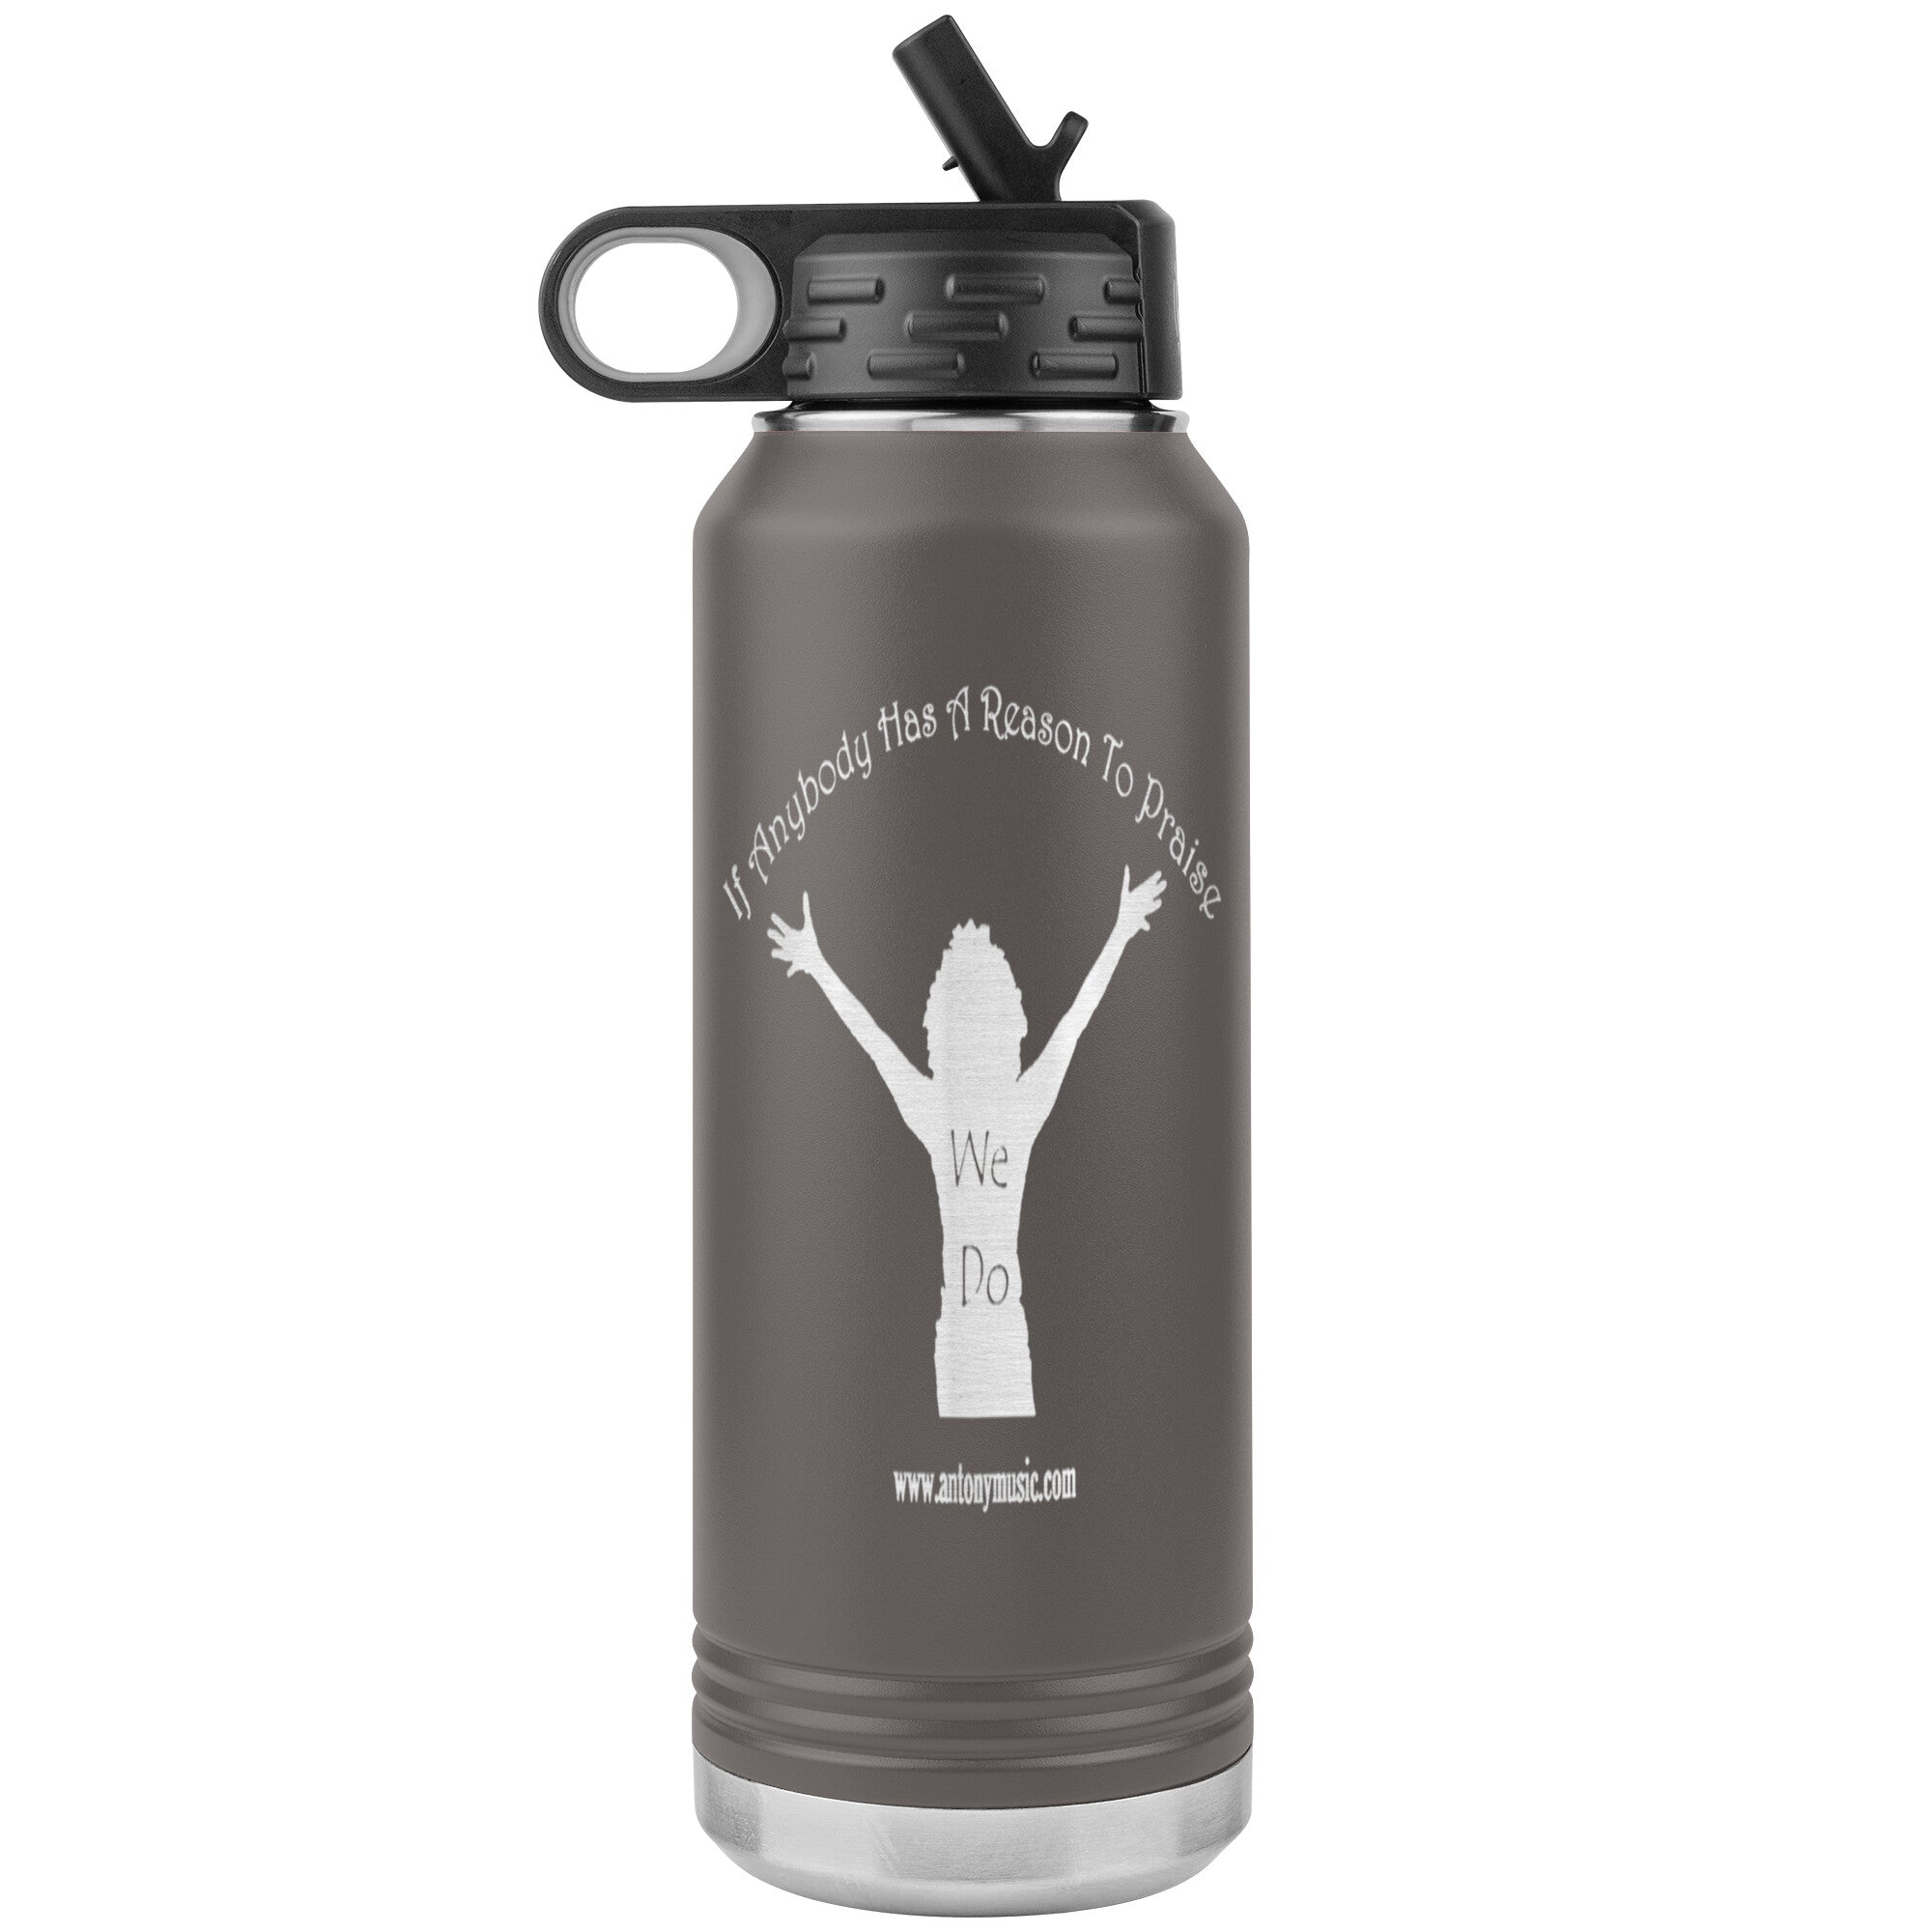 If Anybody Has A Reason To Praise Water Bottle 2